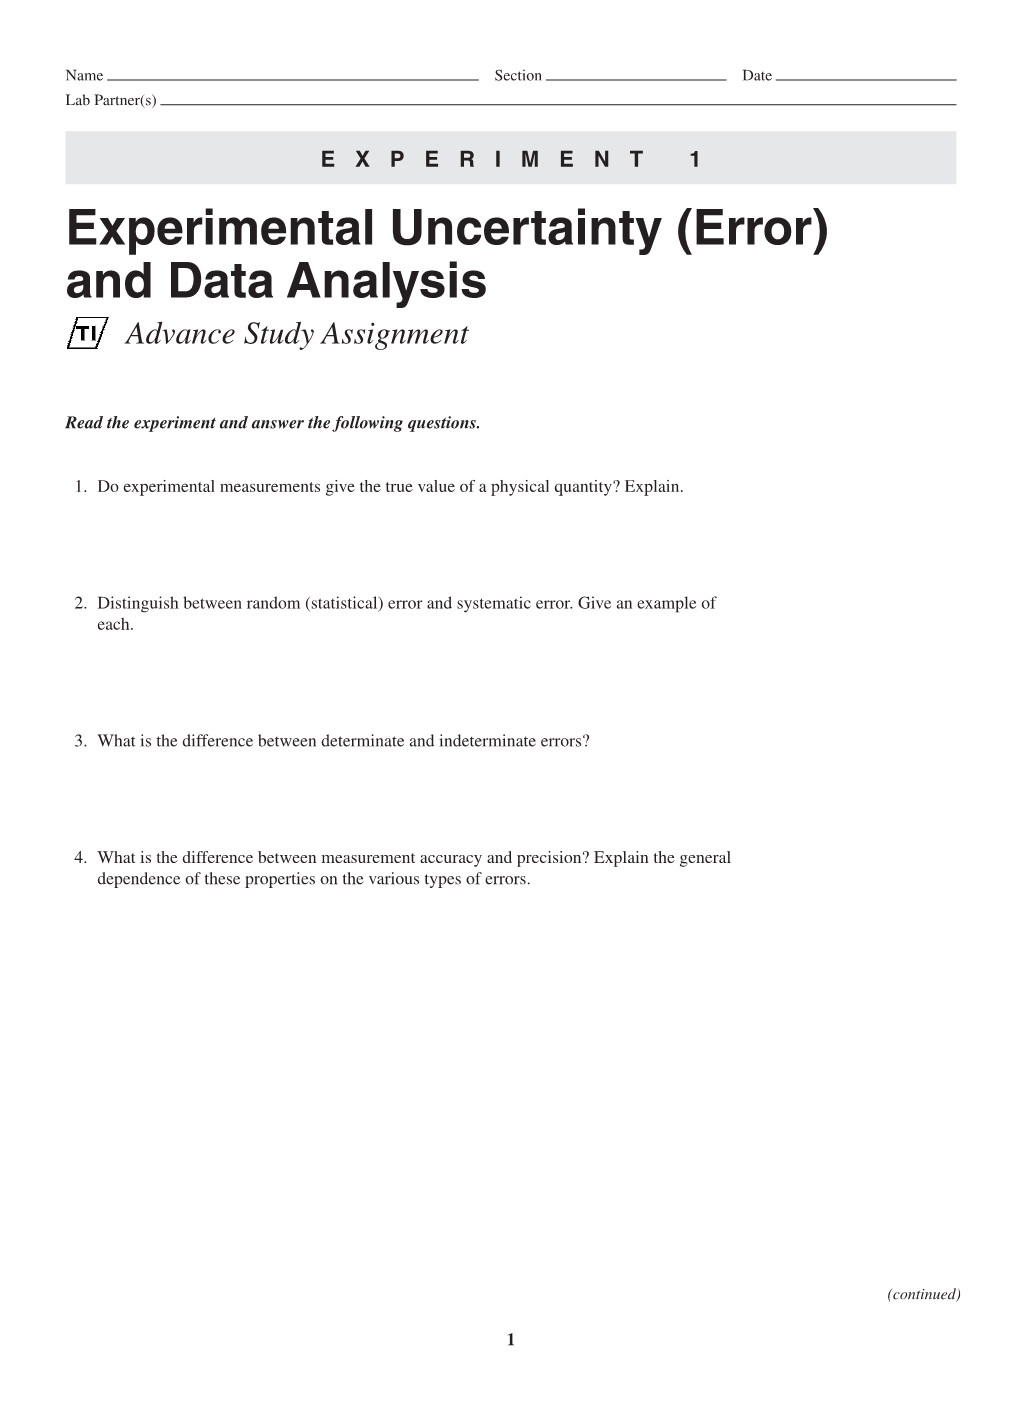 Experimental Uncertainty (Error) and Data Analysis Advance Study Assignment